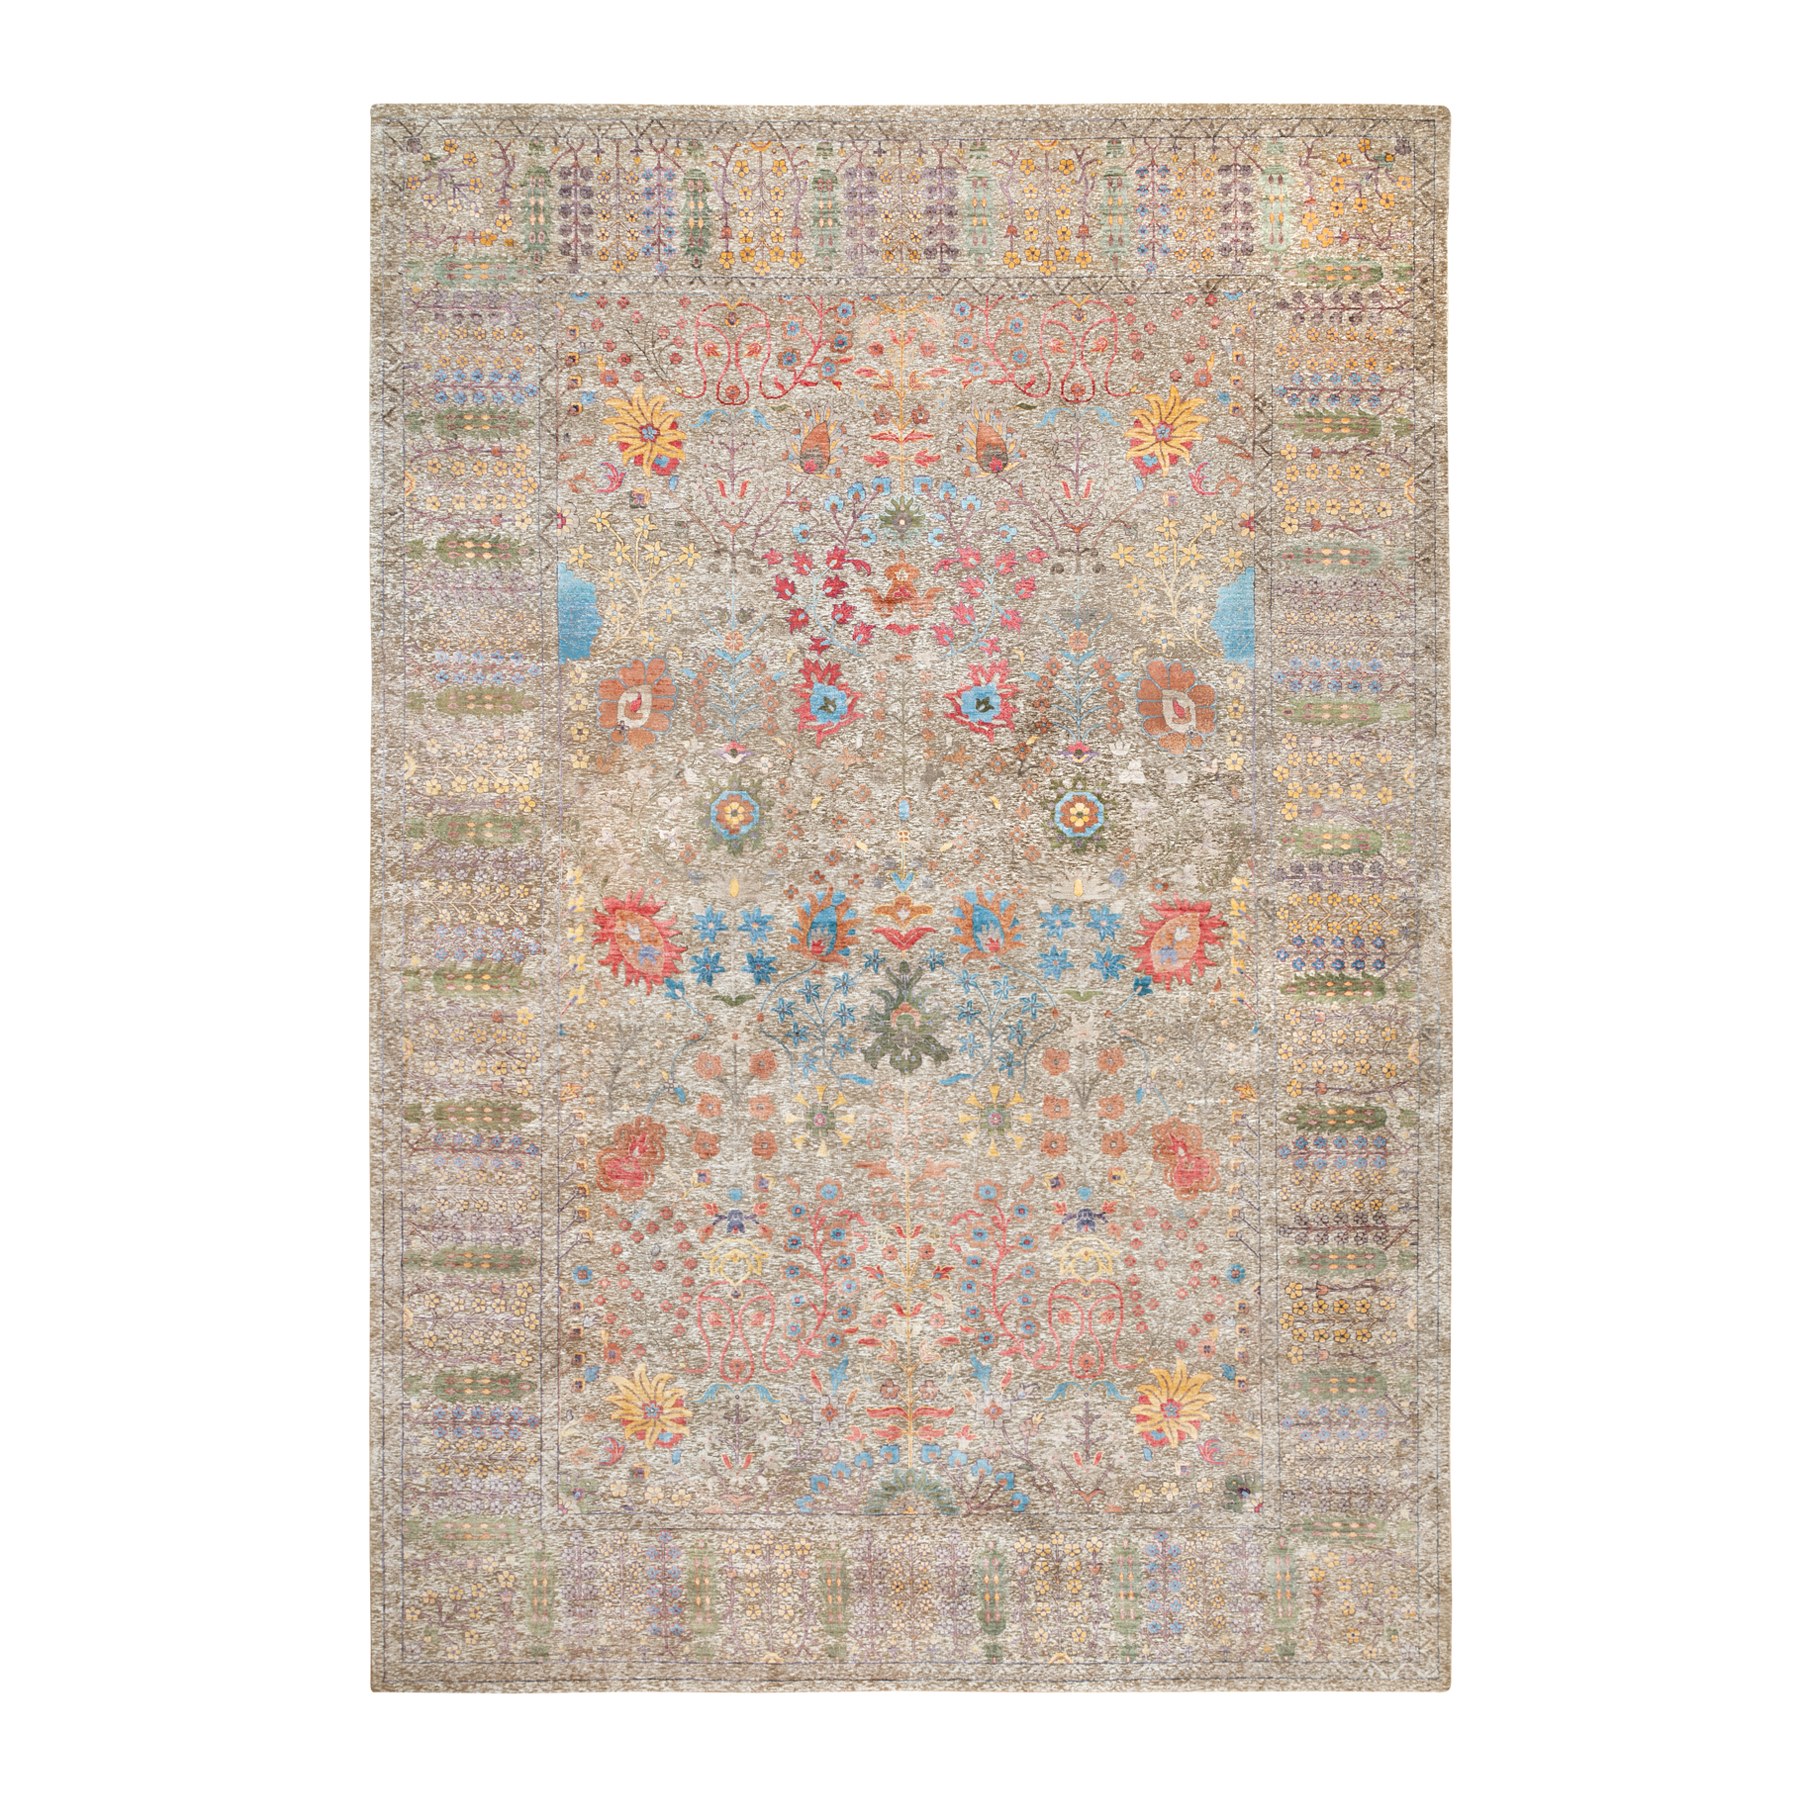 Wool and Silk Rugs LUV530703